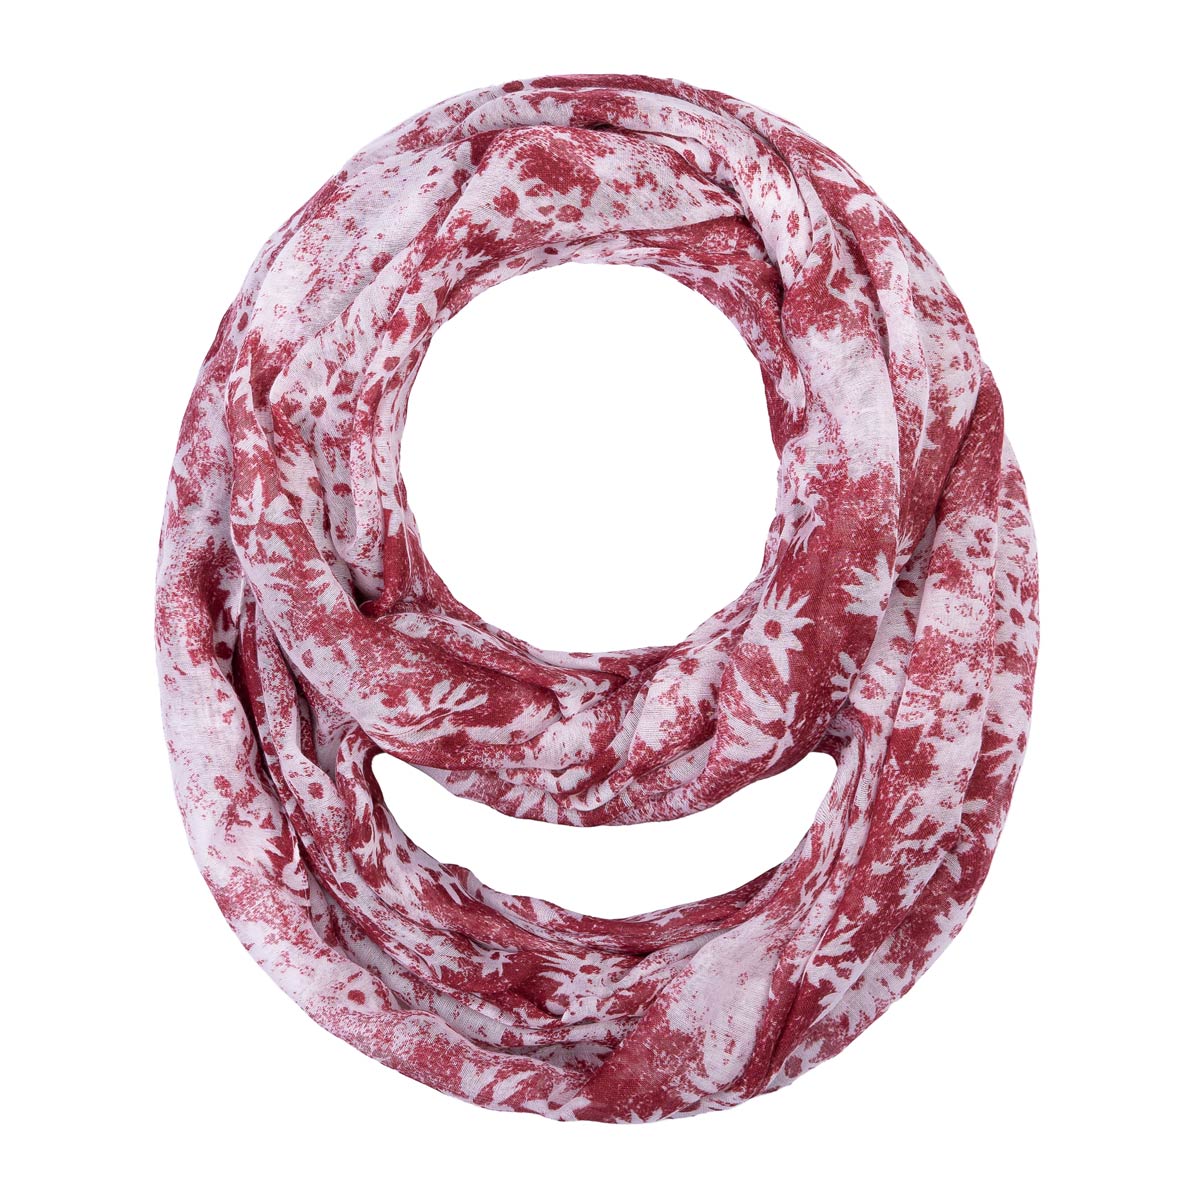 Snood-femme-rouge-blanc--AT-06829_F12-1--